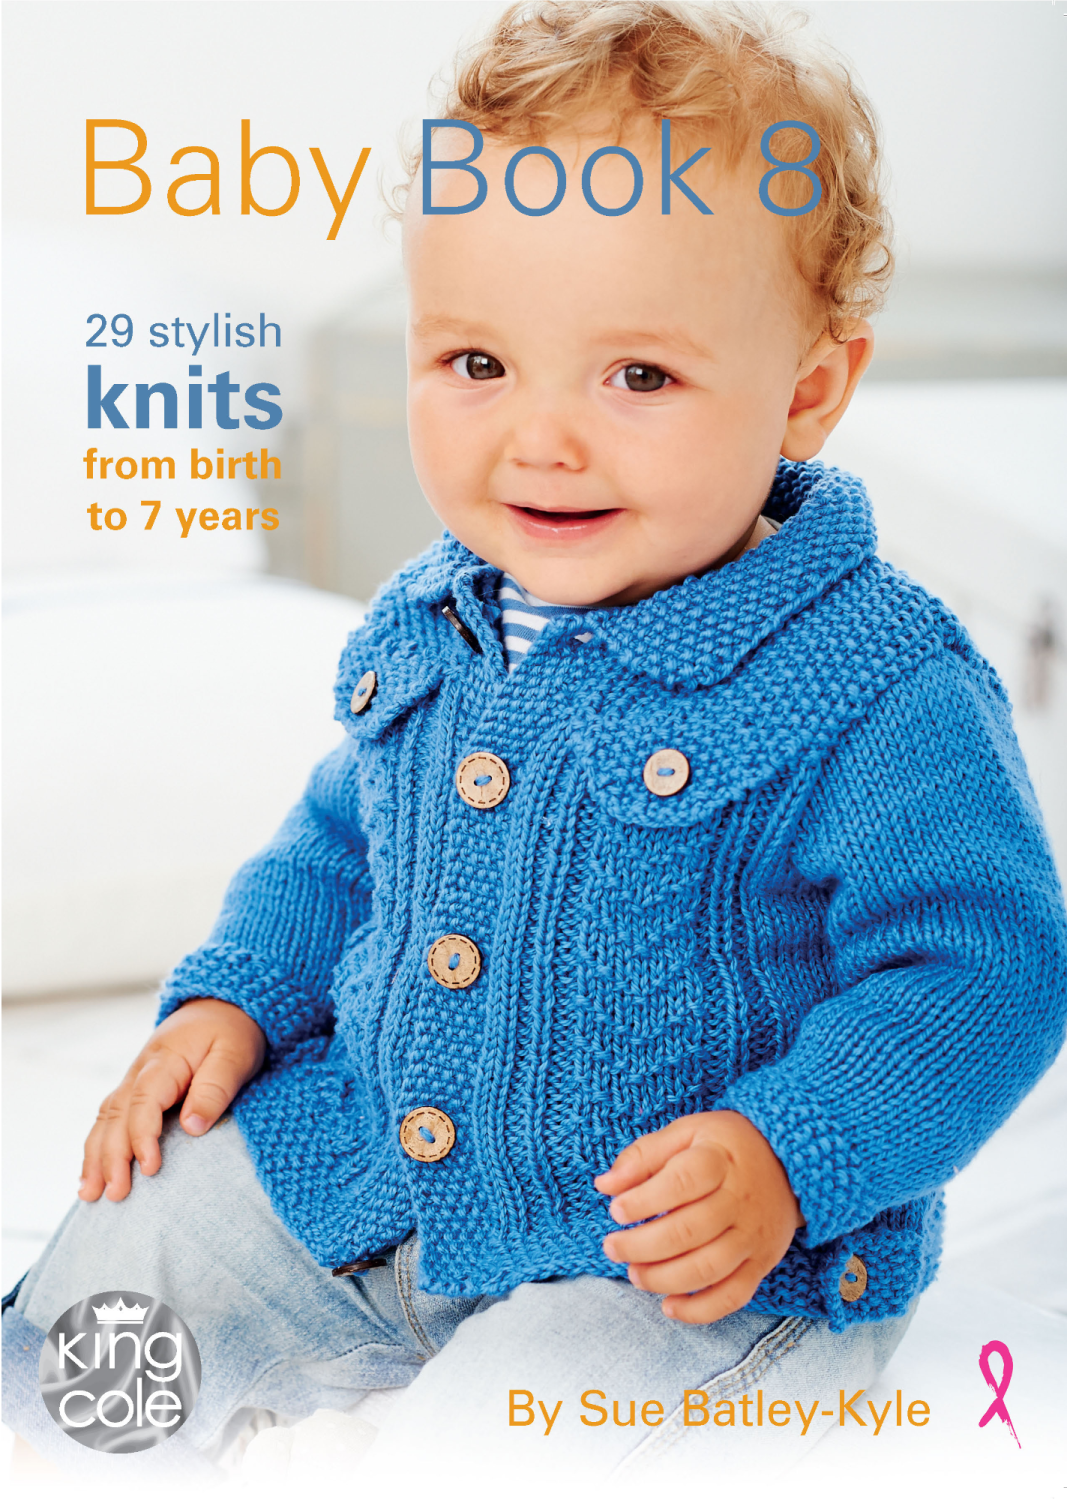 Baby Book 8 -  King Cole Knitting Patterns NEW